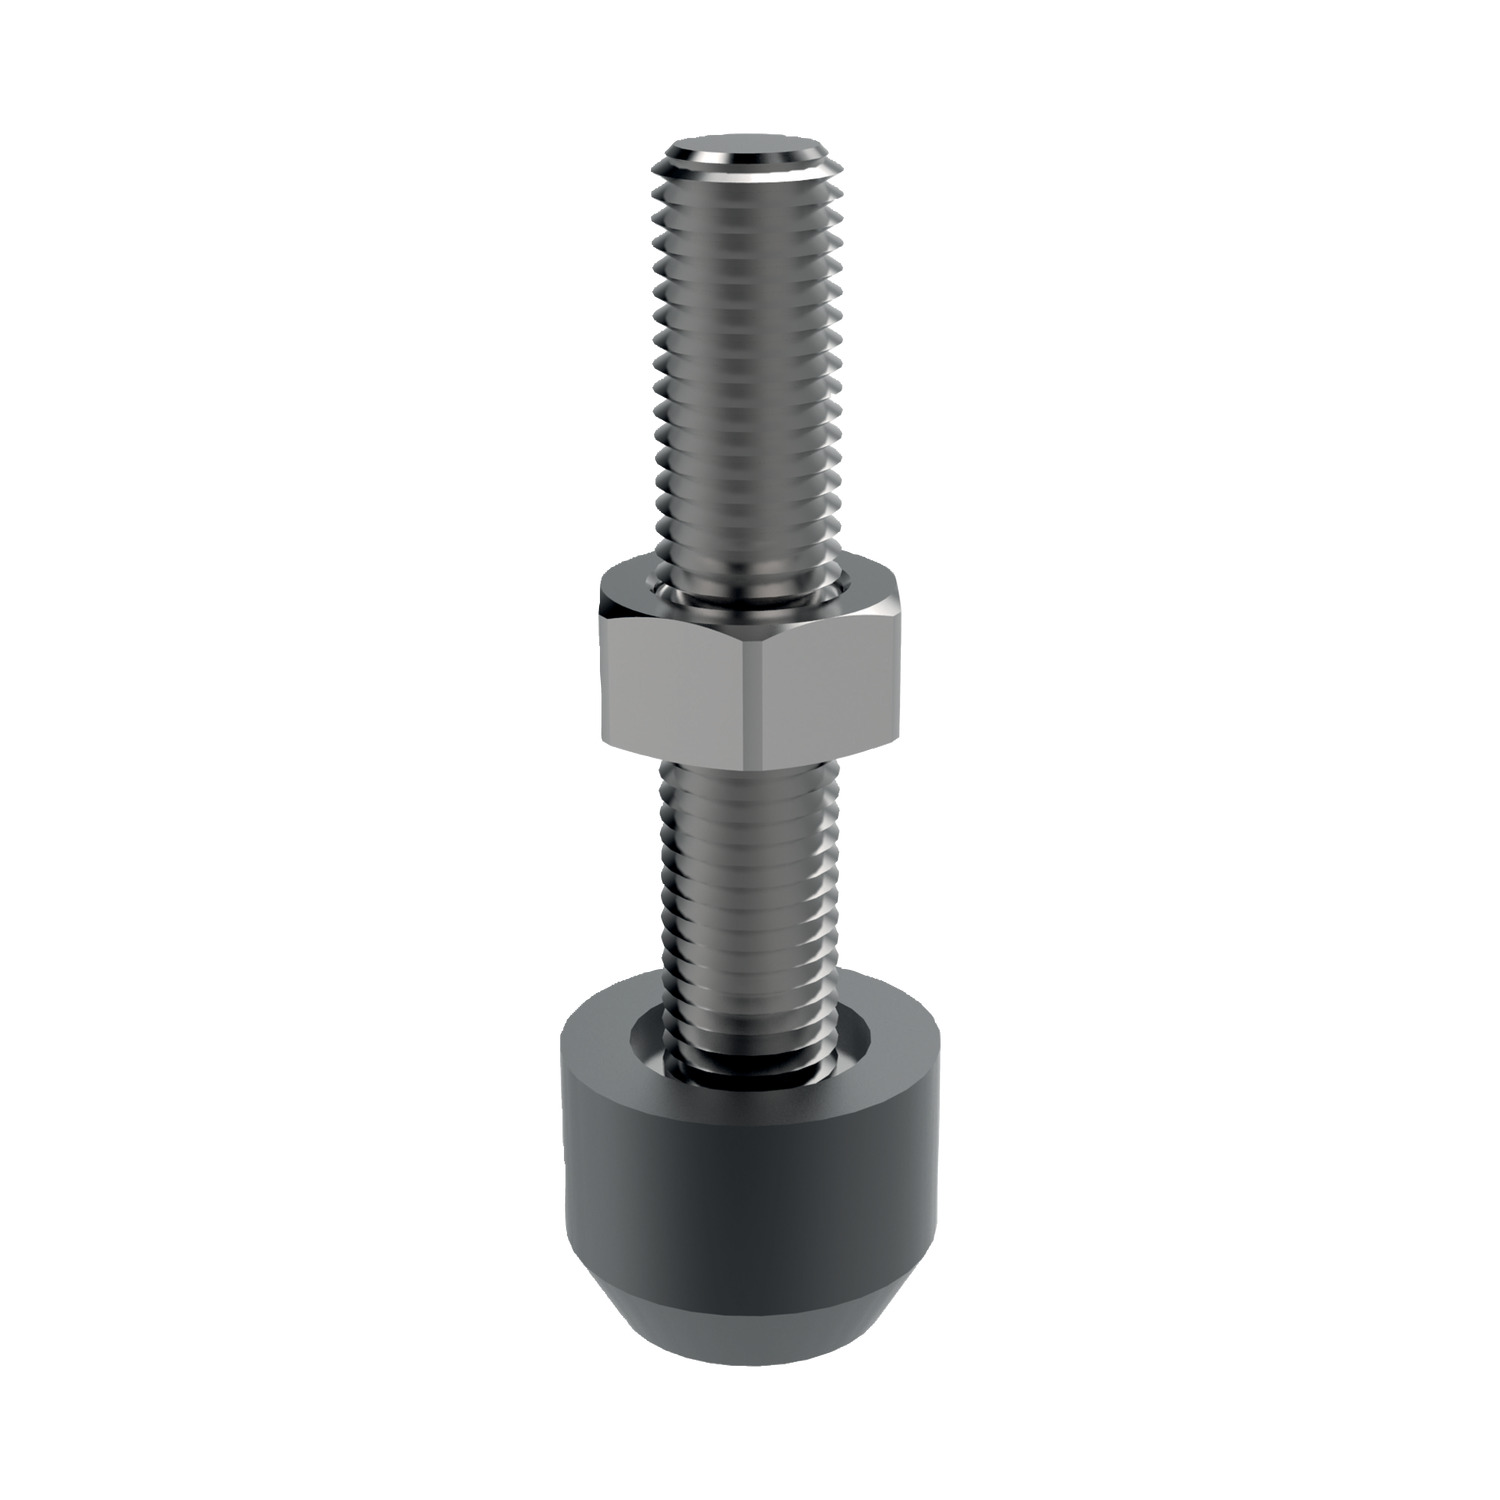 Product 45020.3, ESD Clamping Screws for push-pull toggle clamps / 